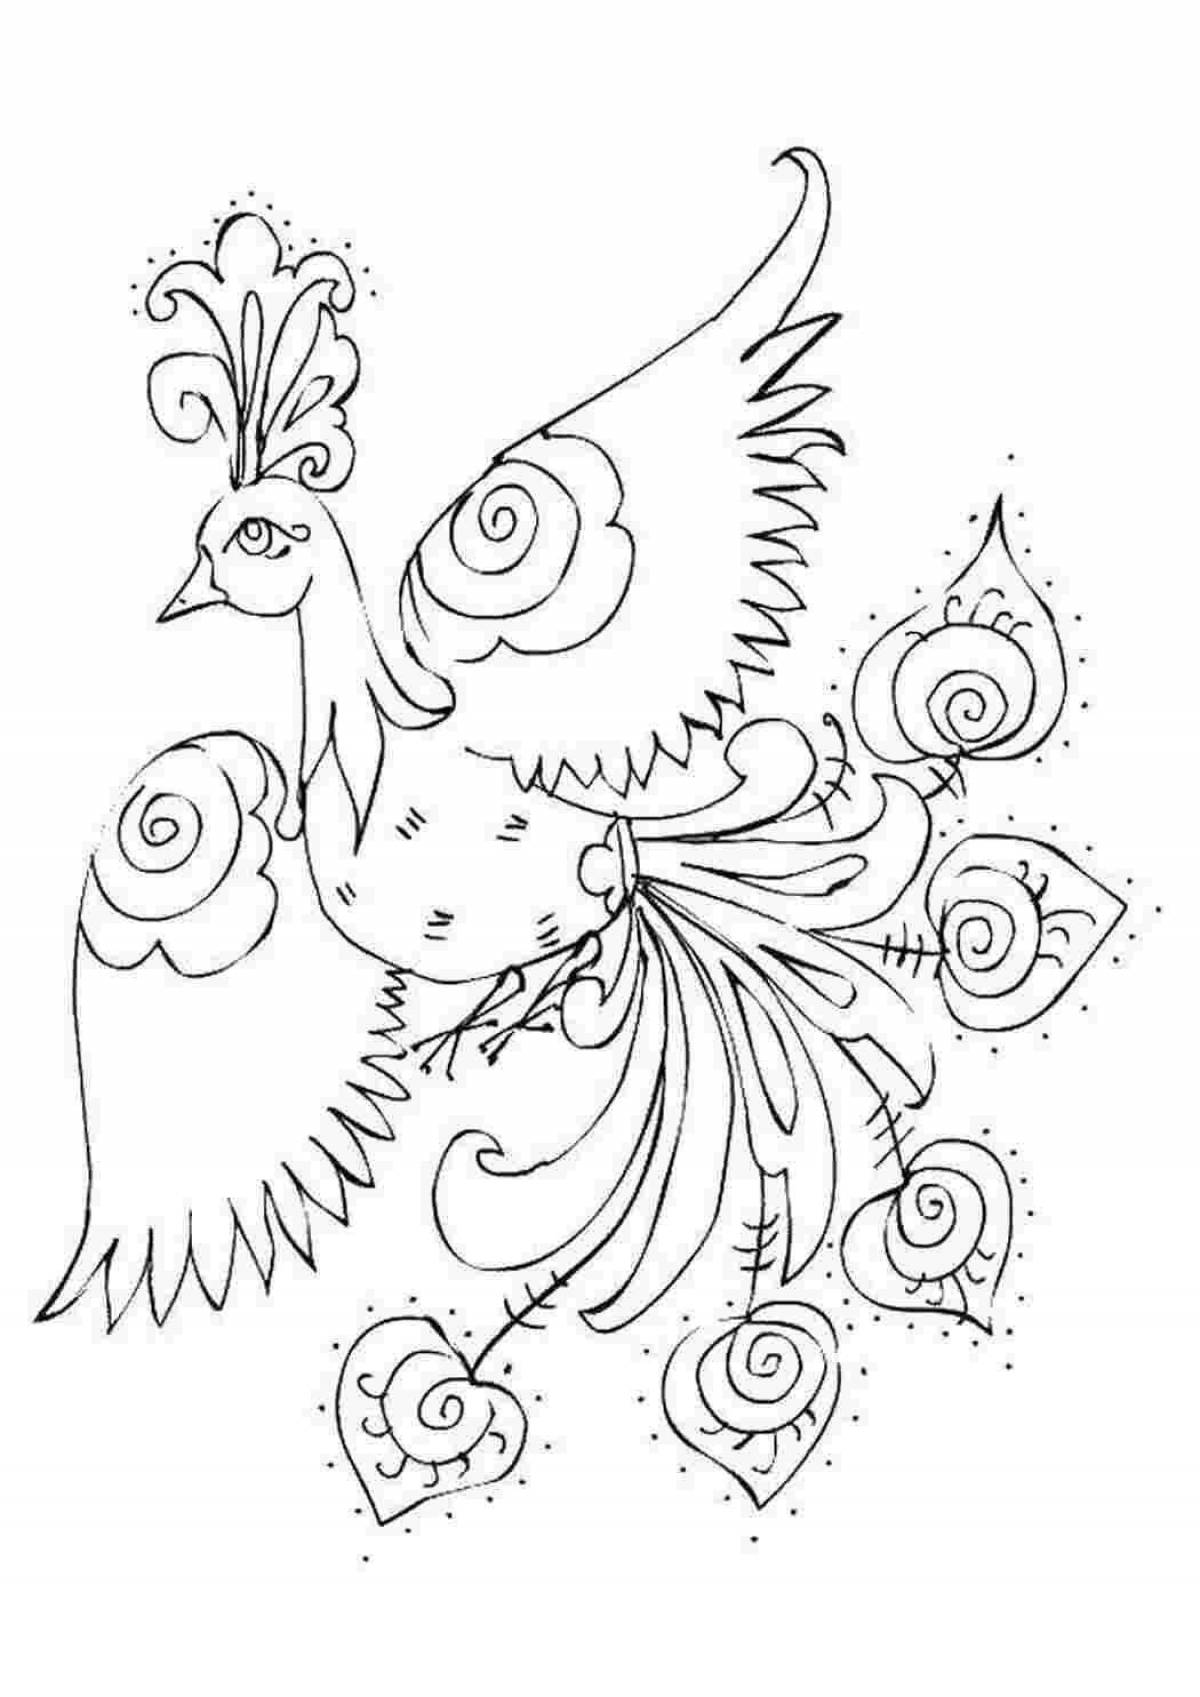 Coloring book magic fiery bird for kids